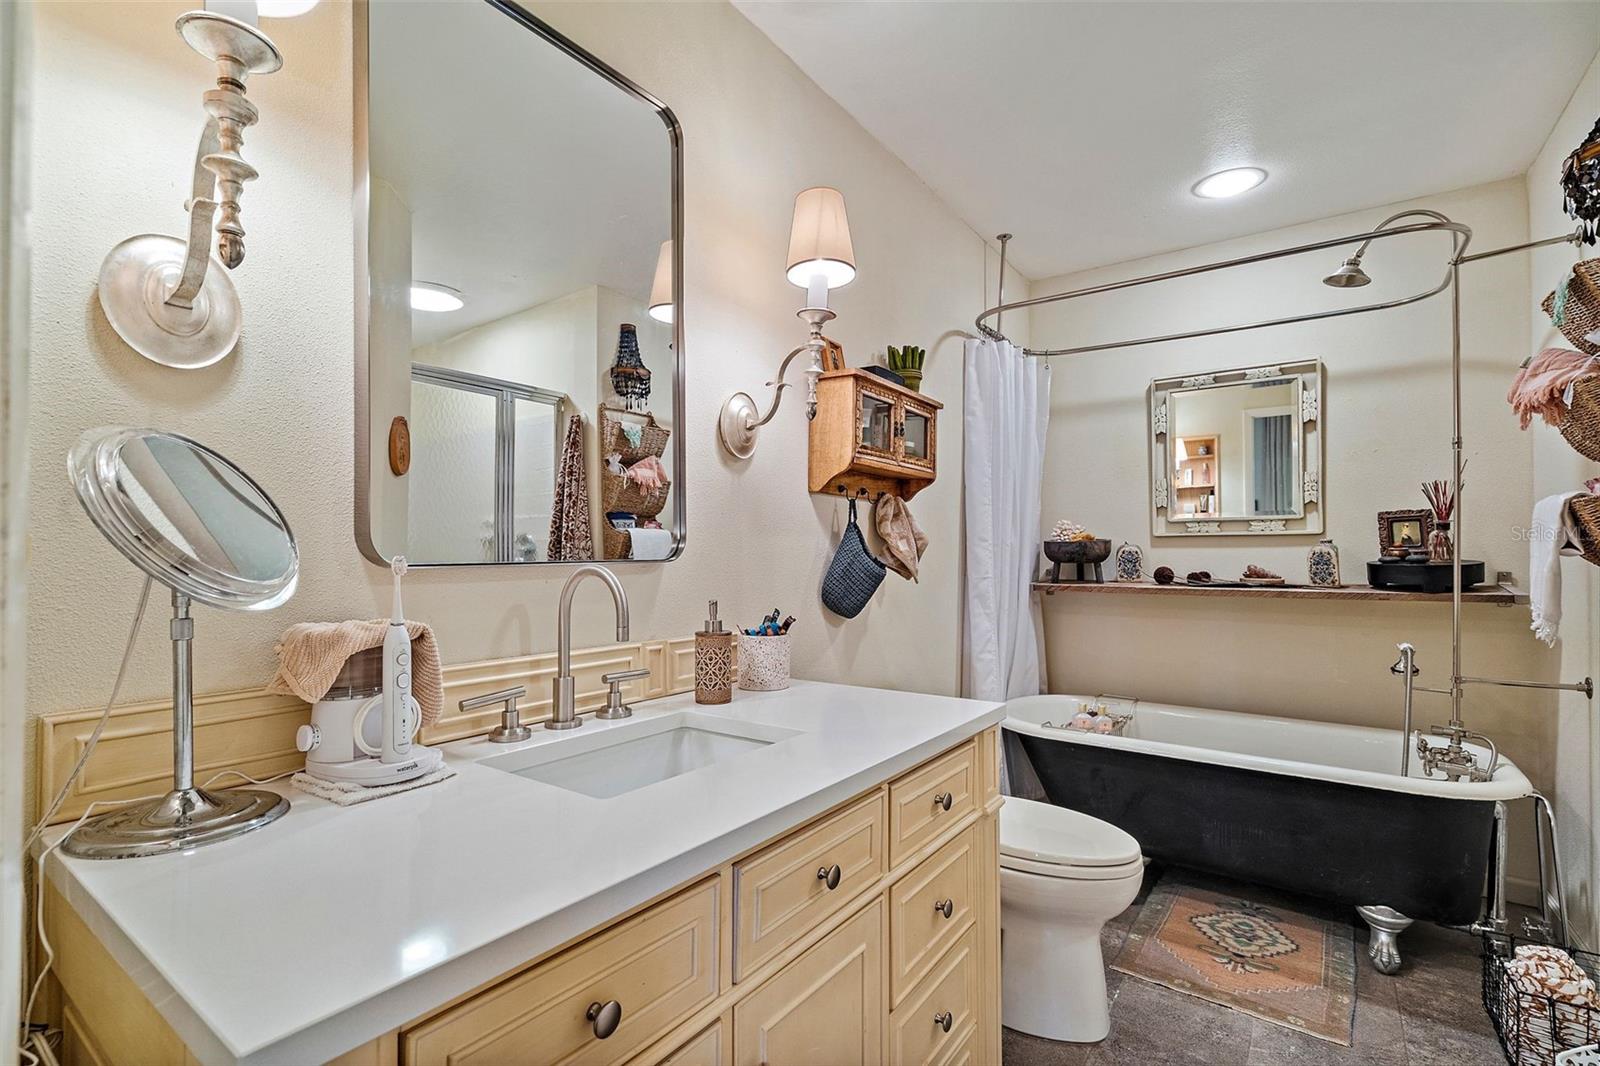 Primary Bathroom with Luxurious Cast Iron Clawfoot Tub With Shower and the Large Vanity with Quartzite Countertop